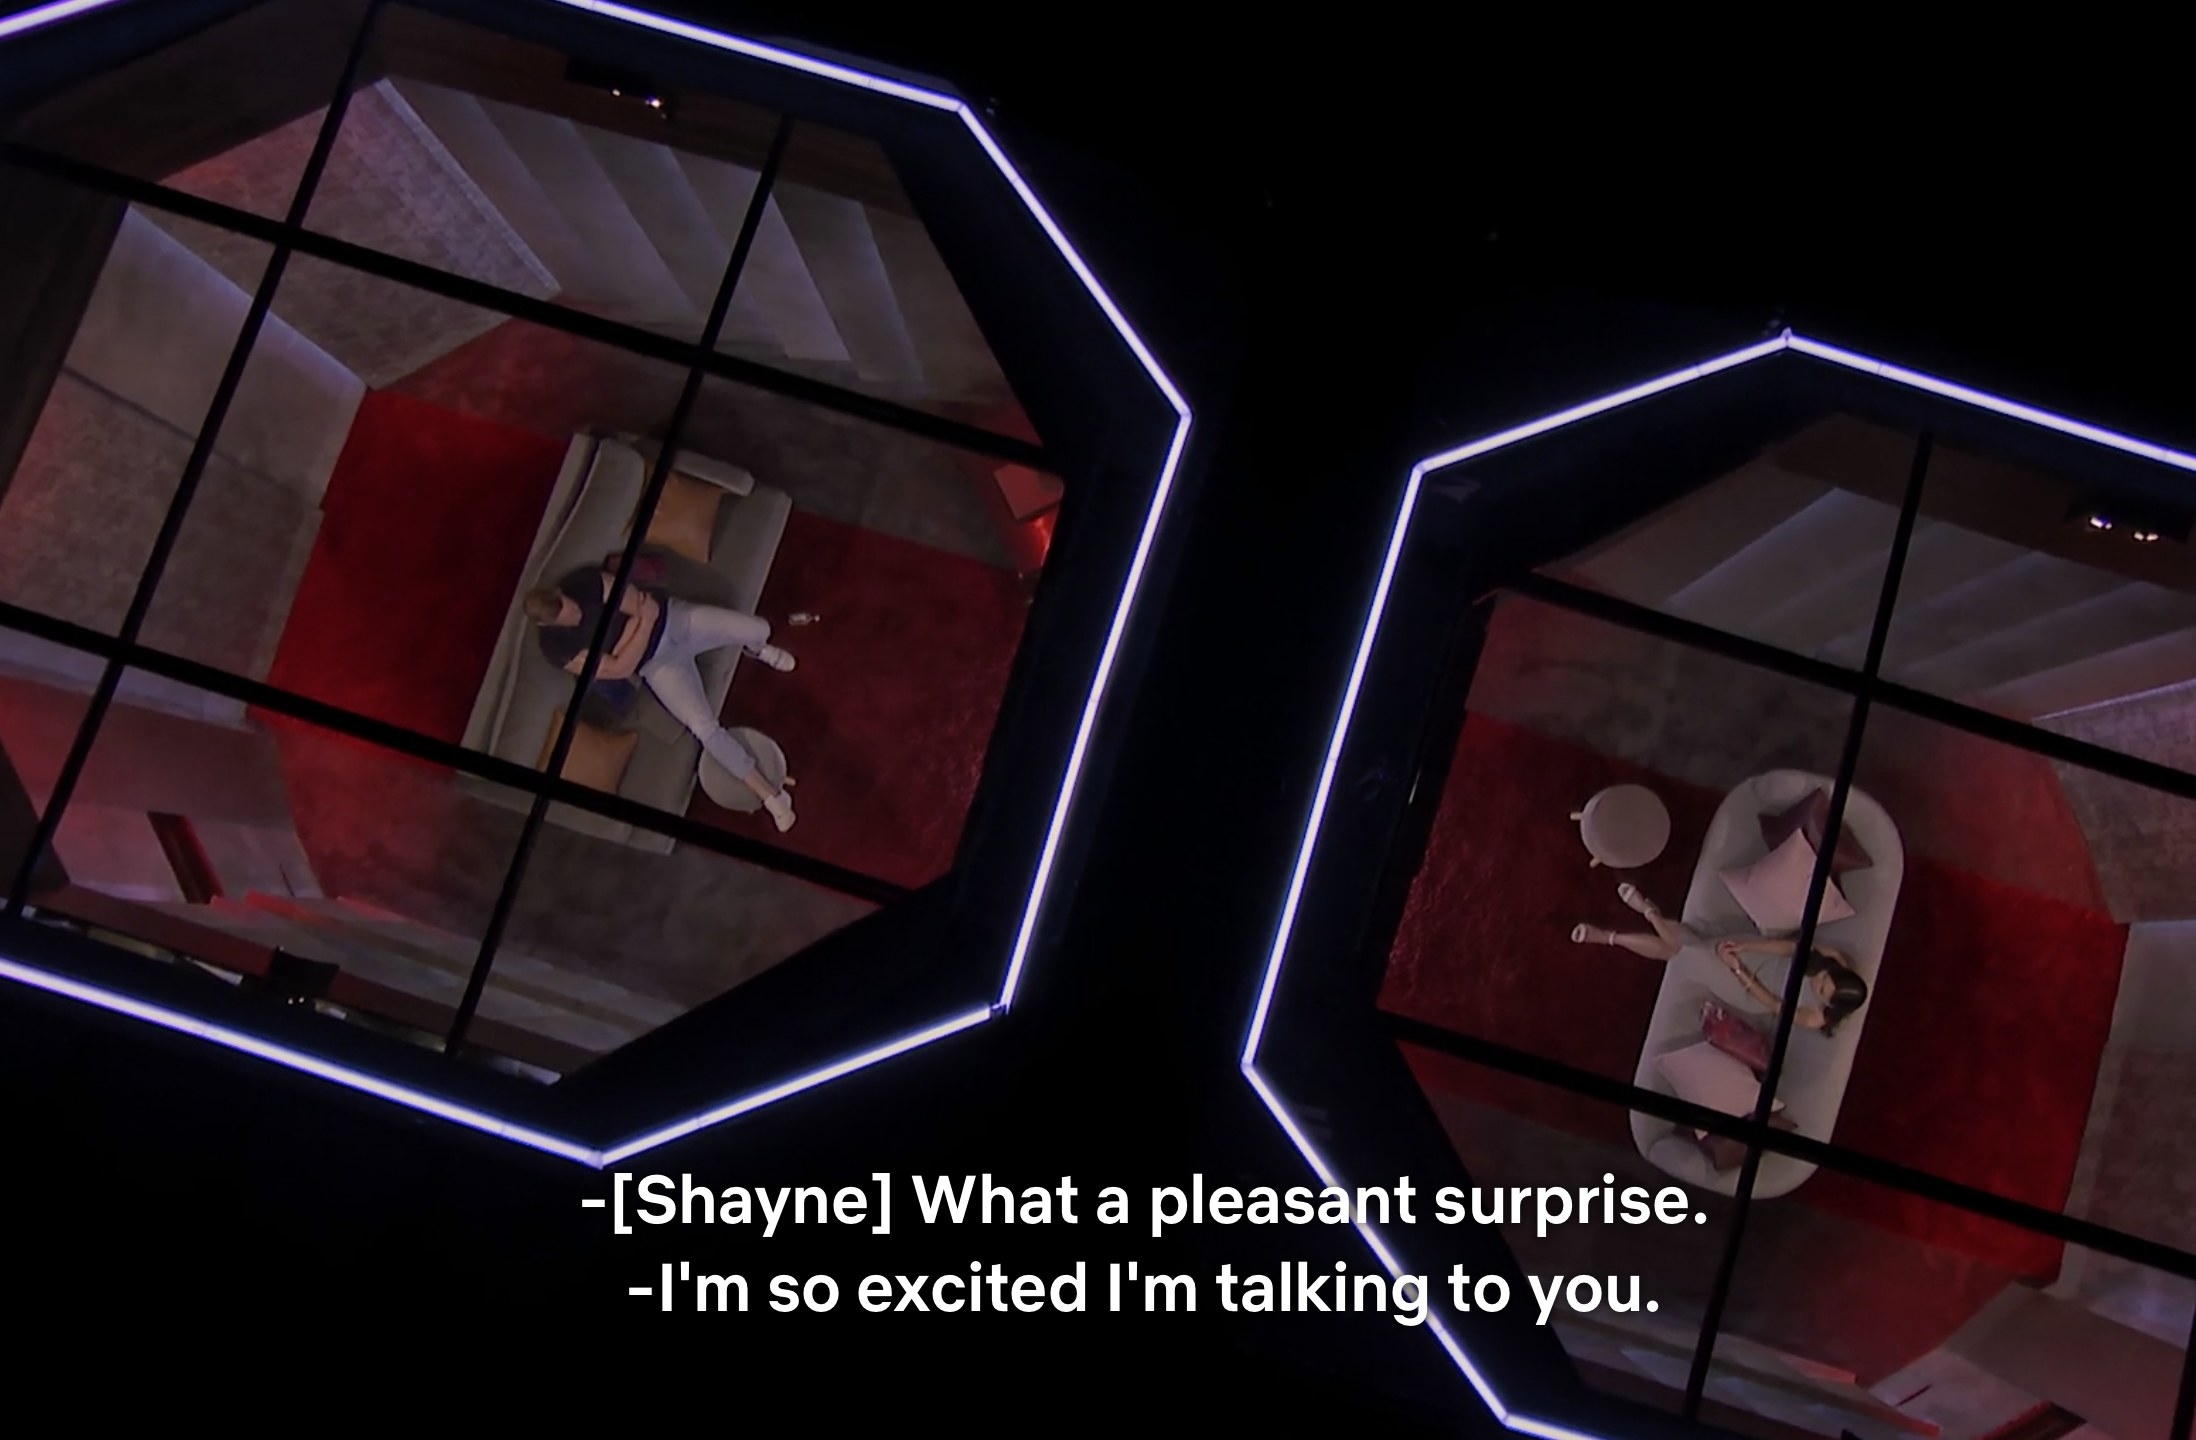 An aerial shot of Shayne and Natalie talking in the pods about being excited to connect with one another again